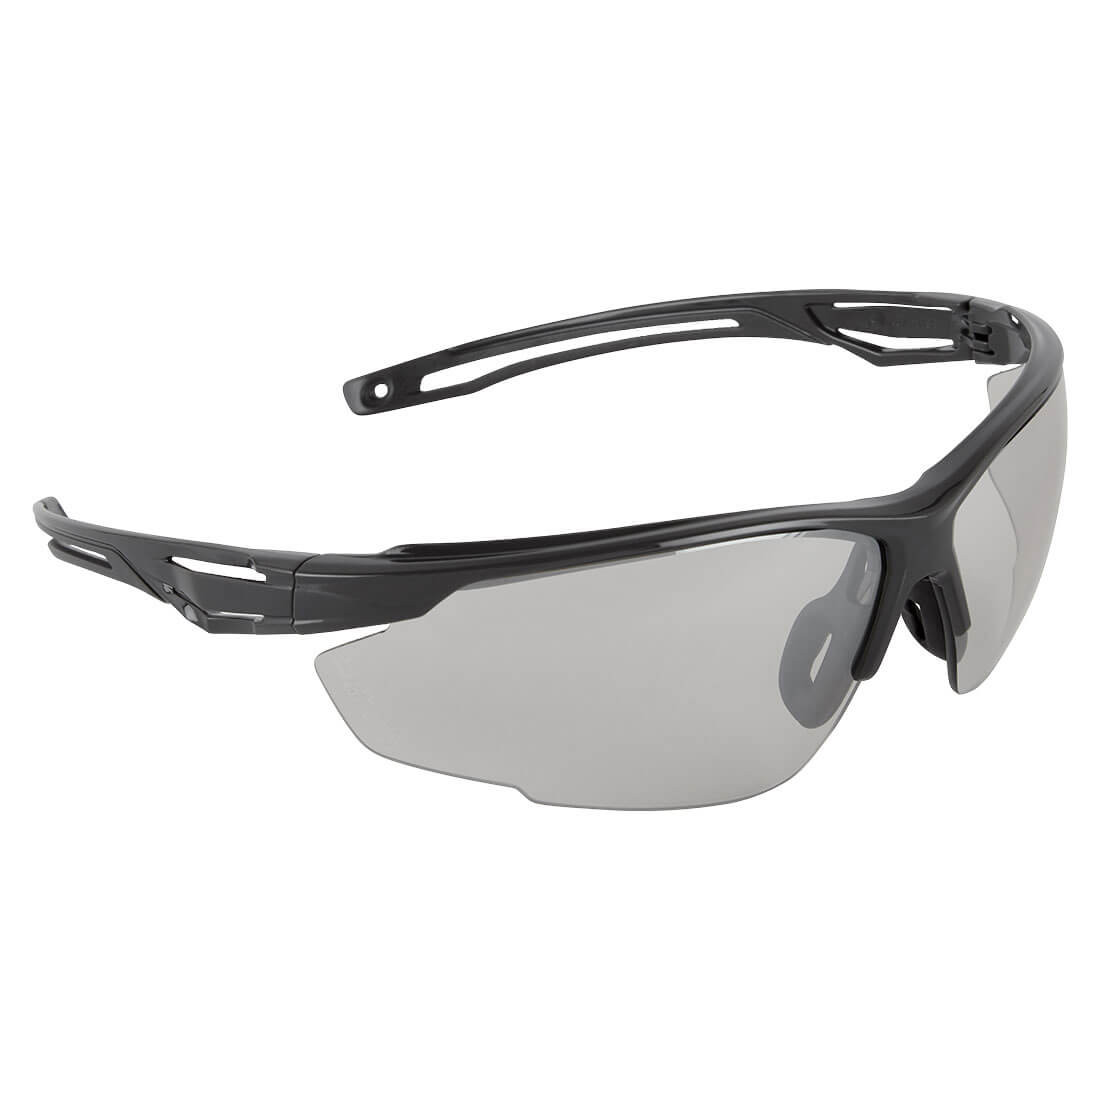 Anthracite Safety Glasses - Personal protection